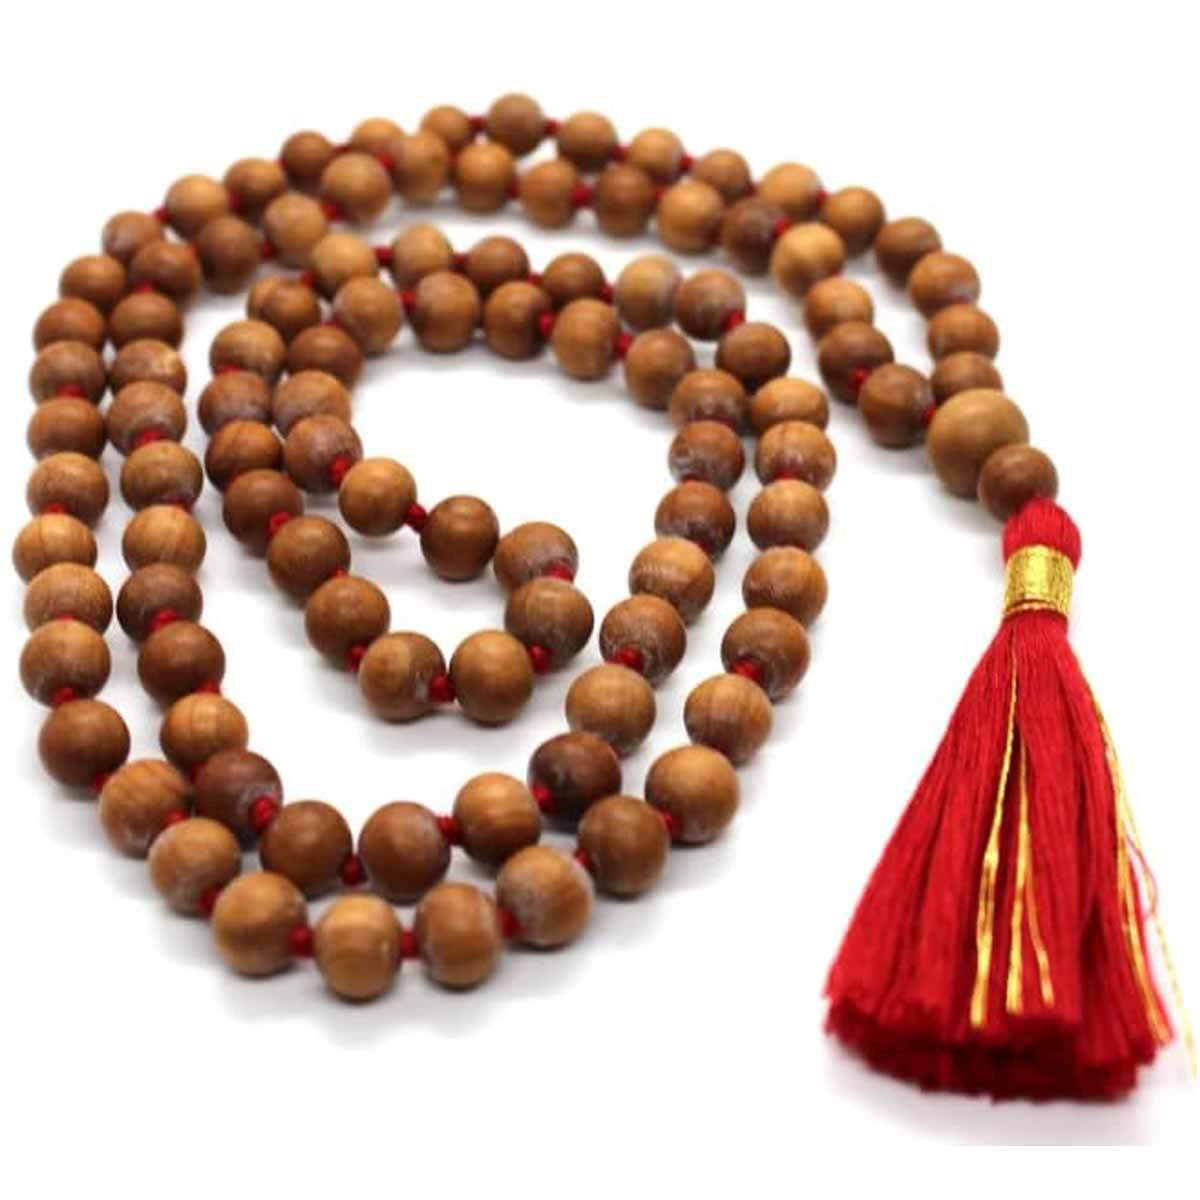 Chandan Yatra Deity (Front Print) PREMIUM Bead Bag with Madhavas Picture &  autograph on the backside – Complete Set includes Japa Mala, Counter beads  and Kanthi mala all Made with Neem /